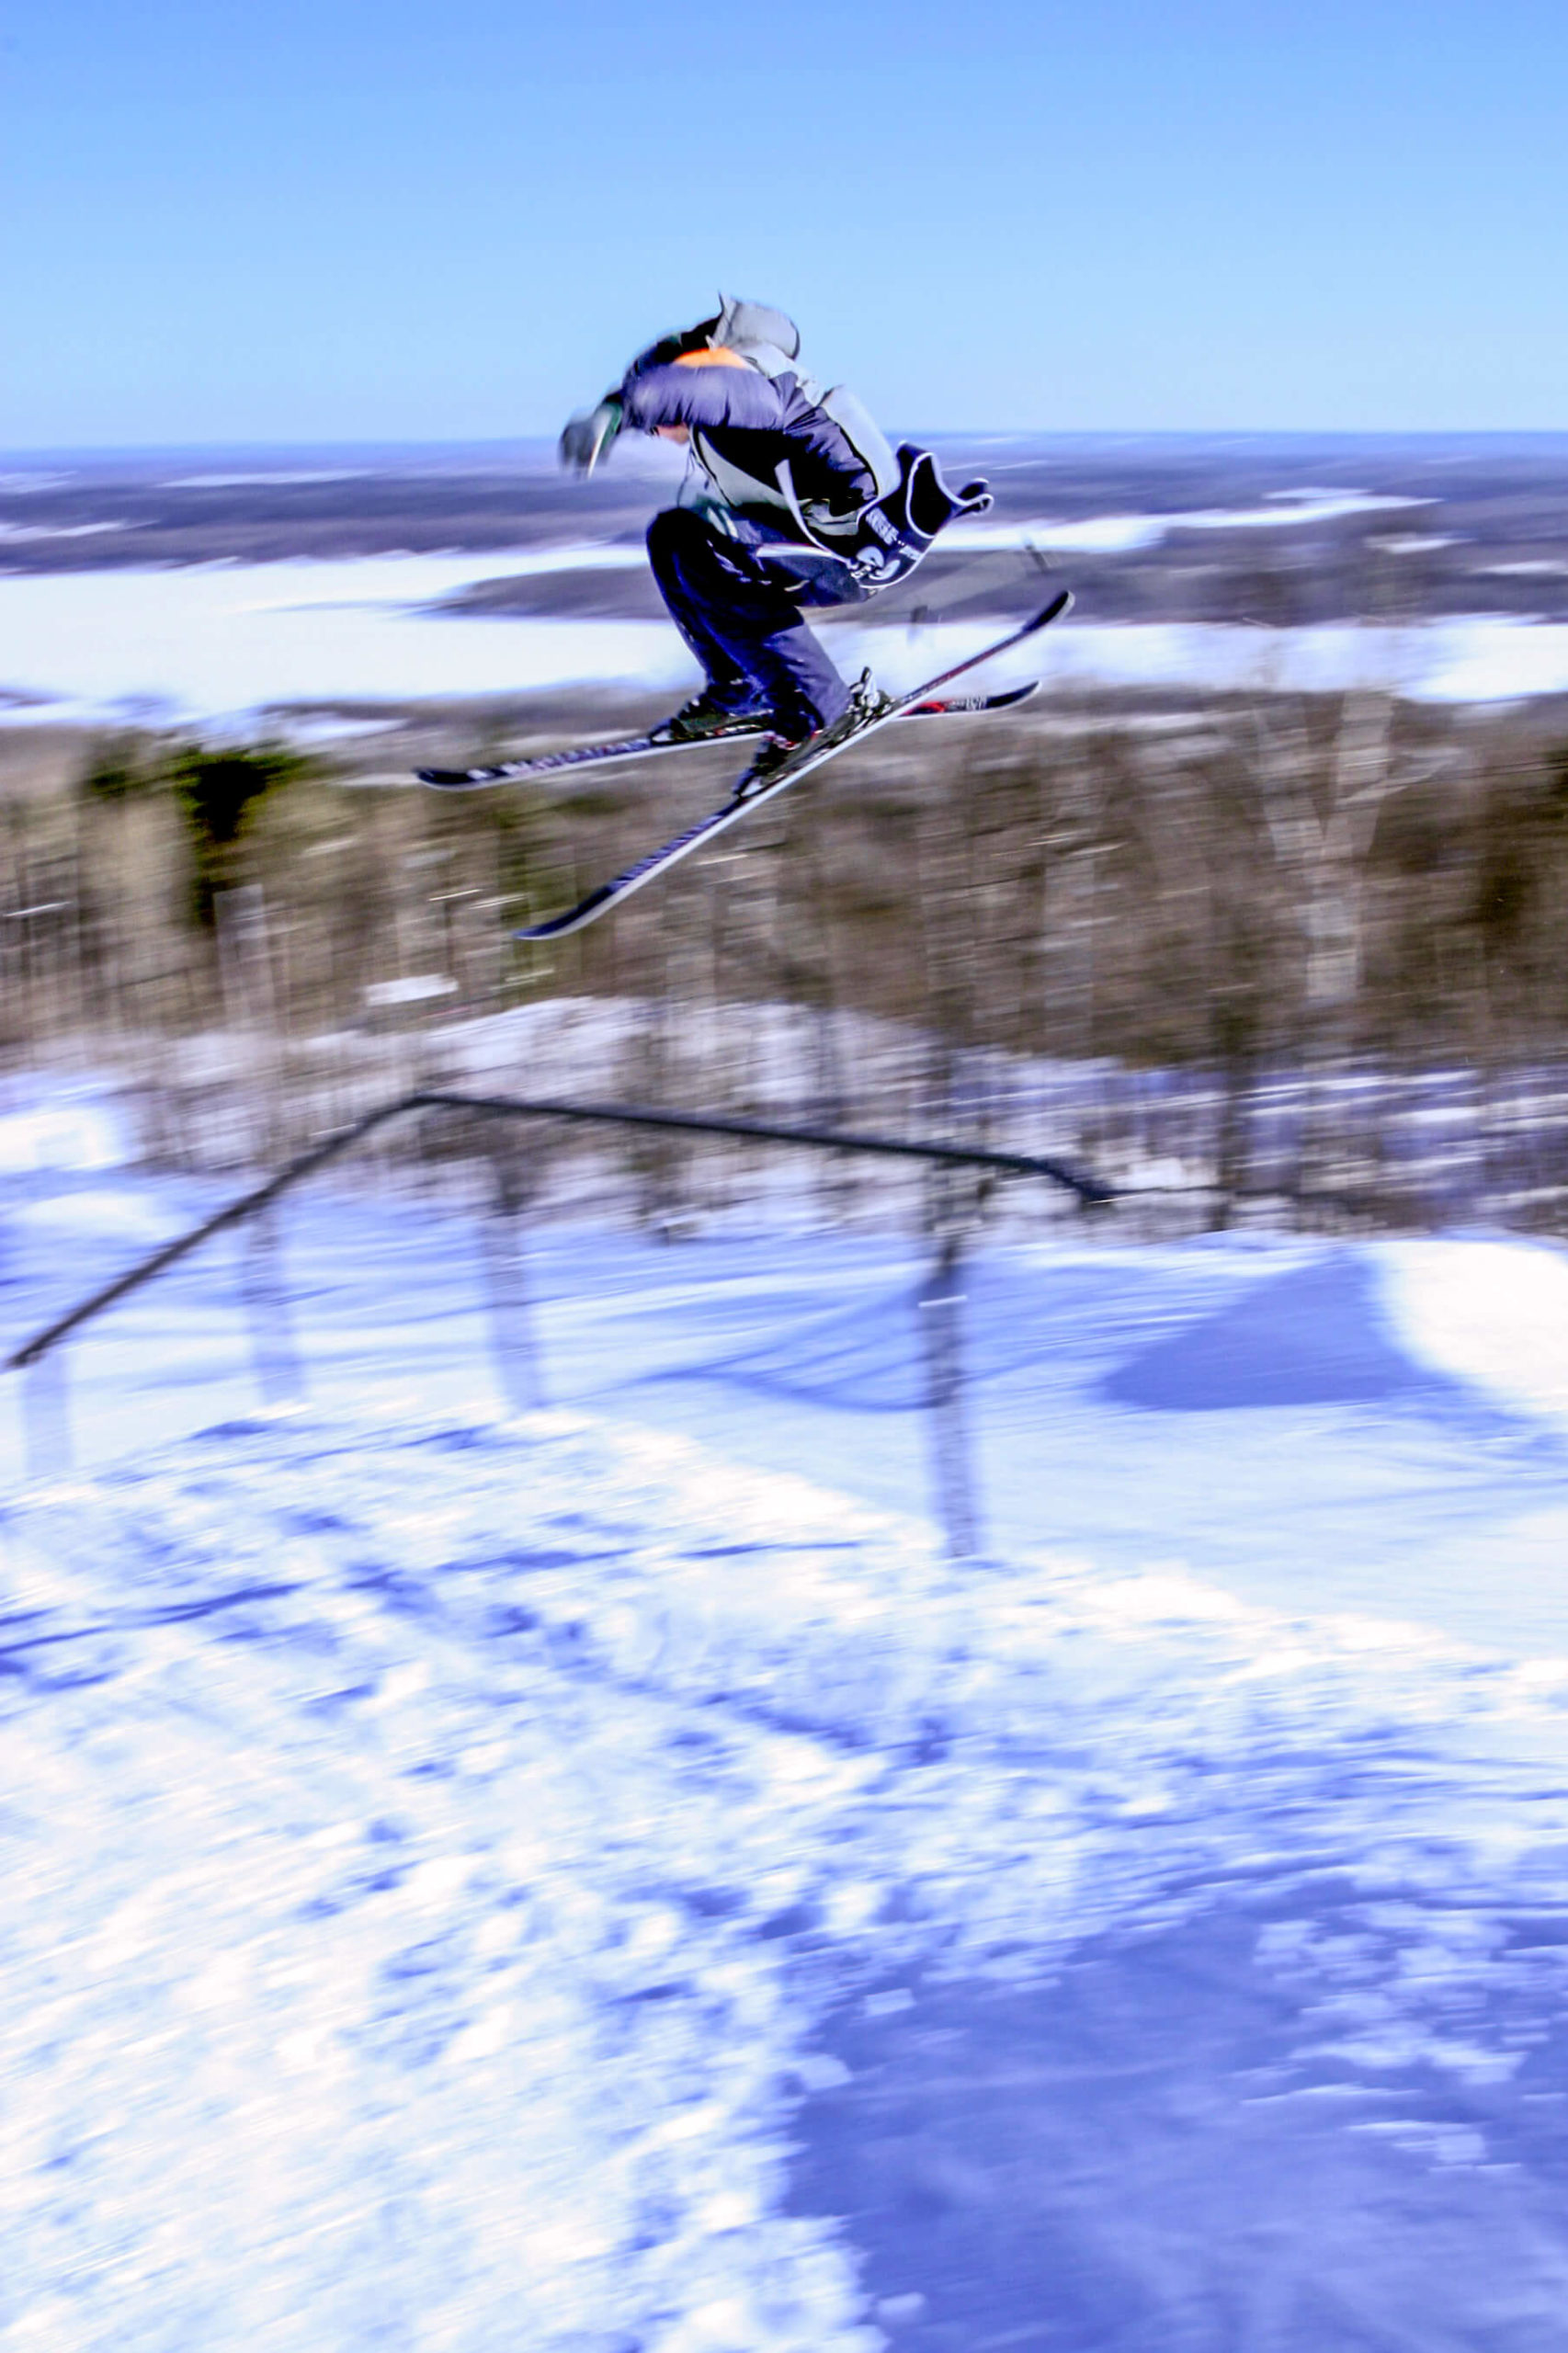 Lance with a disaster onto a flat down rail during the 2004 Midwest Skier Open